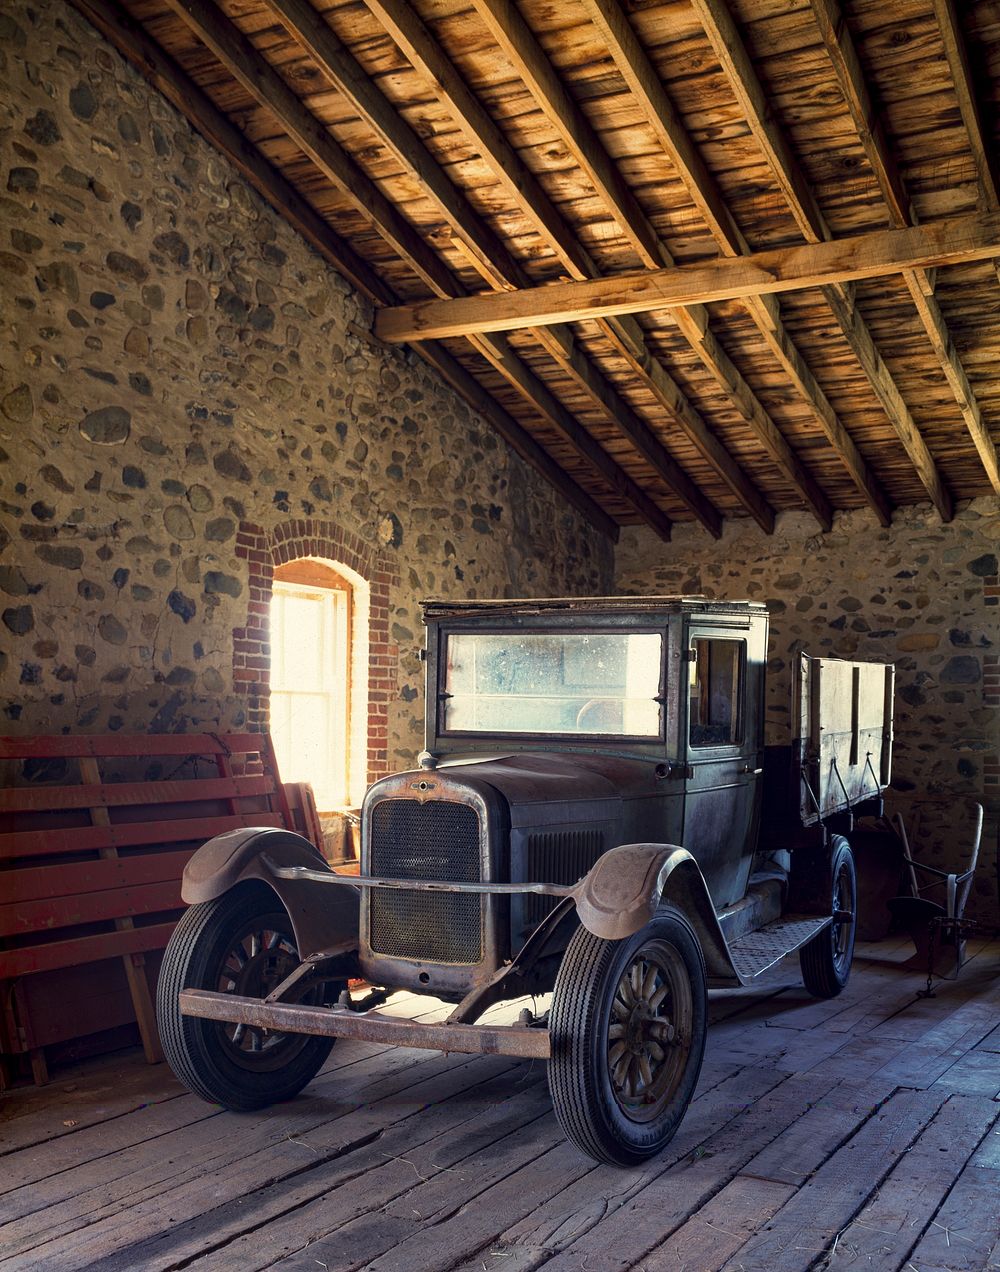 A classic 1925 Chevrolet truck in the Child-Kleffner Ranch's big barn, Montana. Original image from Carol M.…